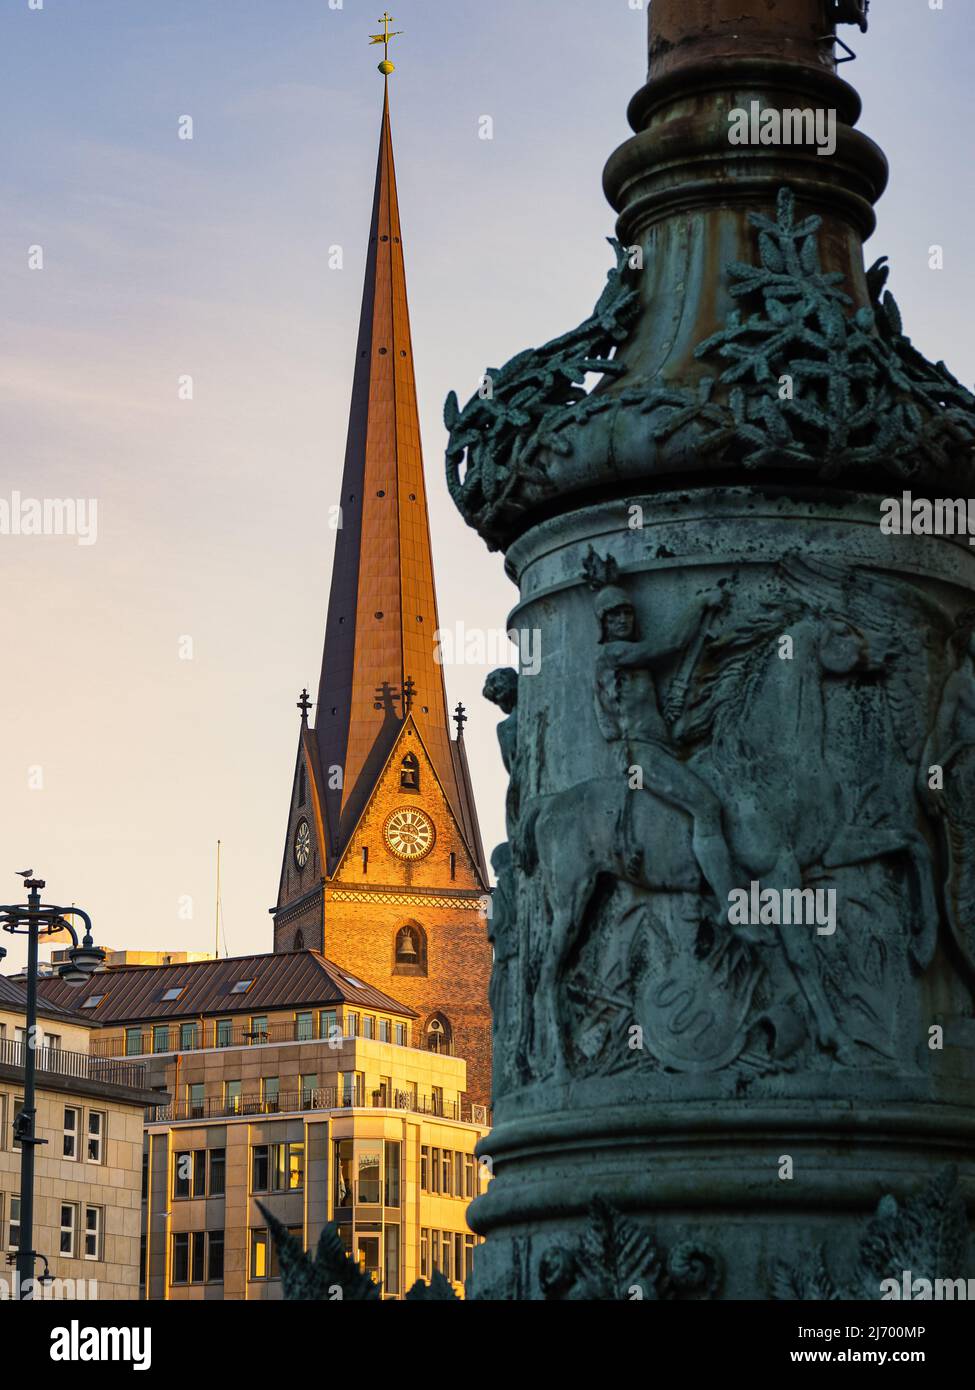 vertical photography with view from hamburg town square to the roof of the clock tower of st. peter's church during dusk. Stock Photo